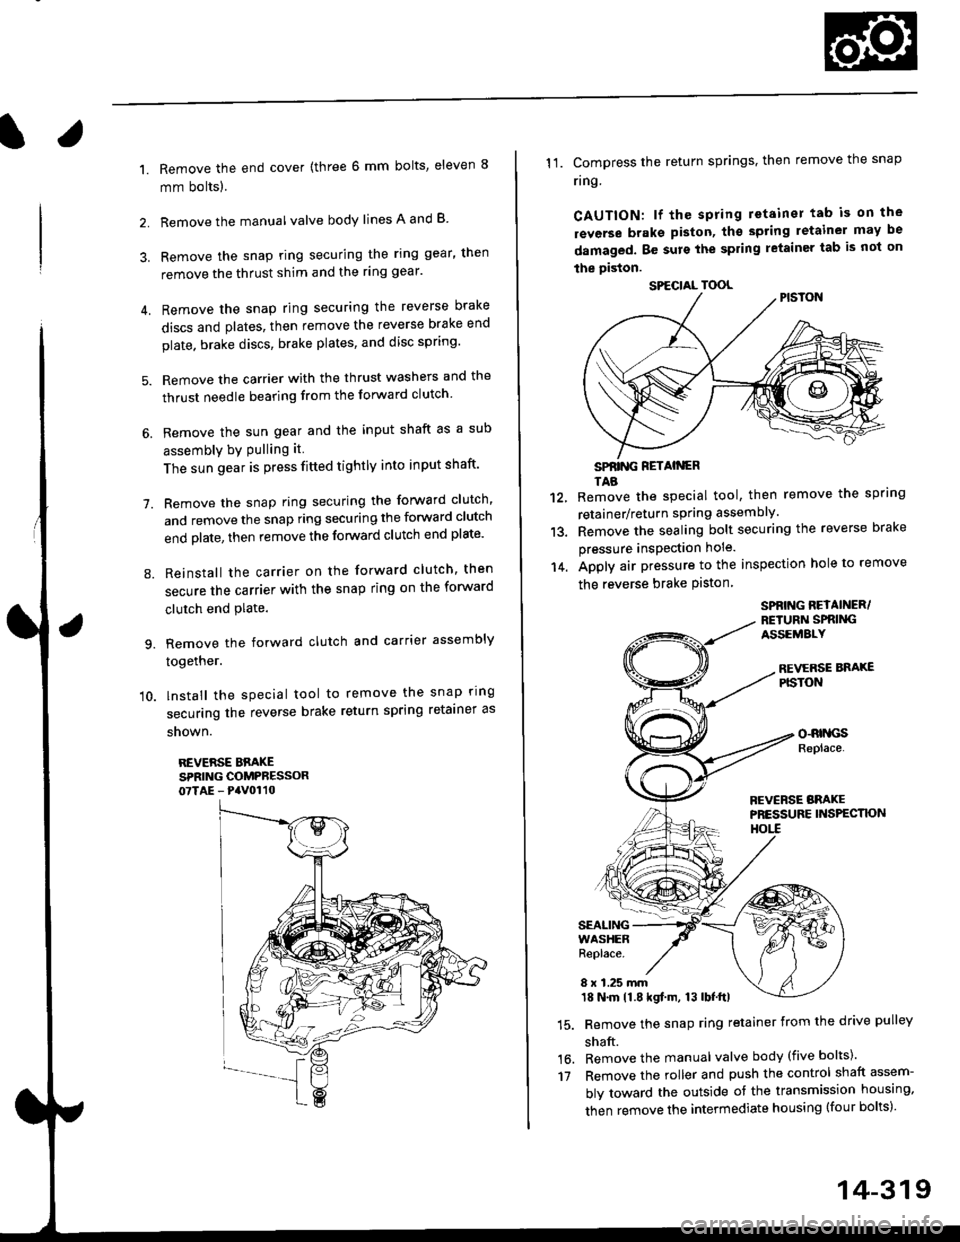 HONDA CIVIC 1999 6.G Workshop Manual l.
1.
2.
Remove the end cover {three 6 mm bolts, eleven 8
mm bolts).
Remove the manualvalve body lines A and B
3. Remove the snap ring securing the ring gear, then
remove the thrust shim and the ring 